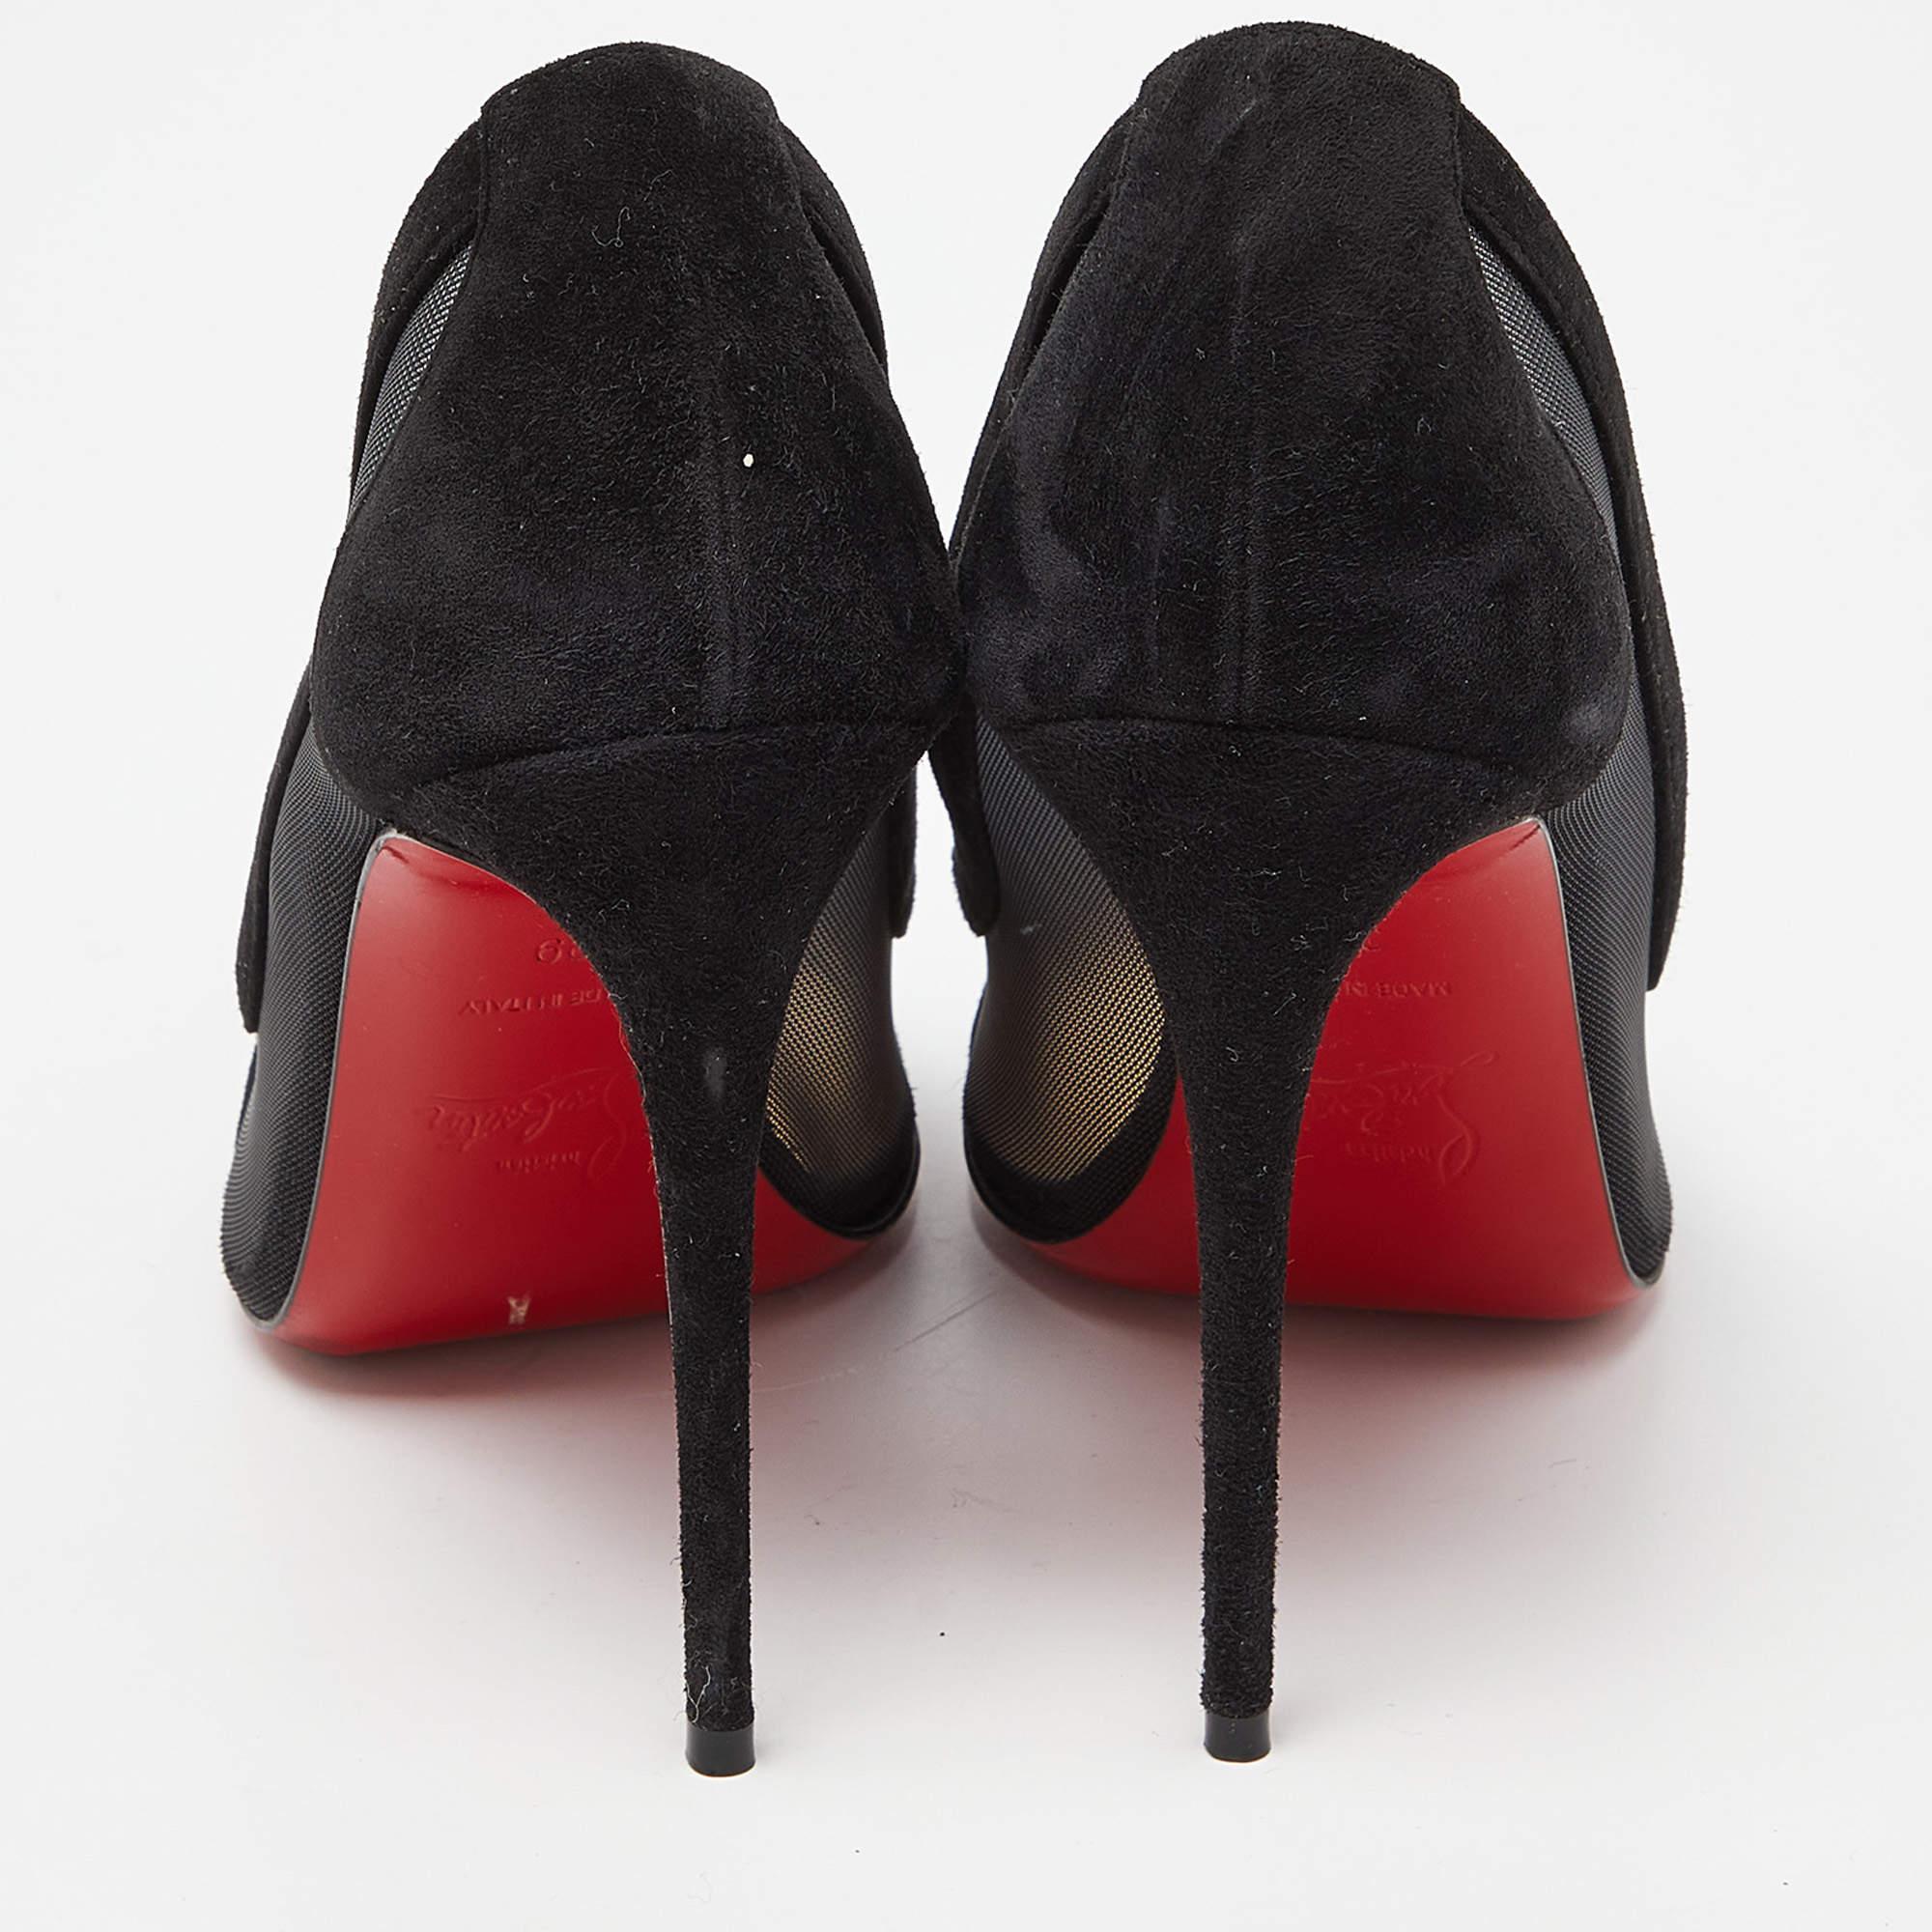 Women's Christian Louboutin Black Mesh and Suede Panel Pumps Size 39